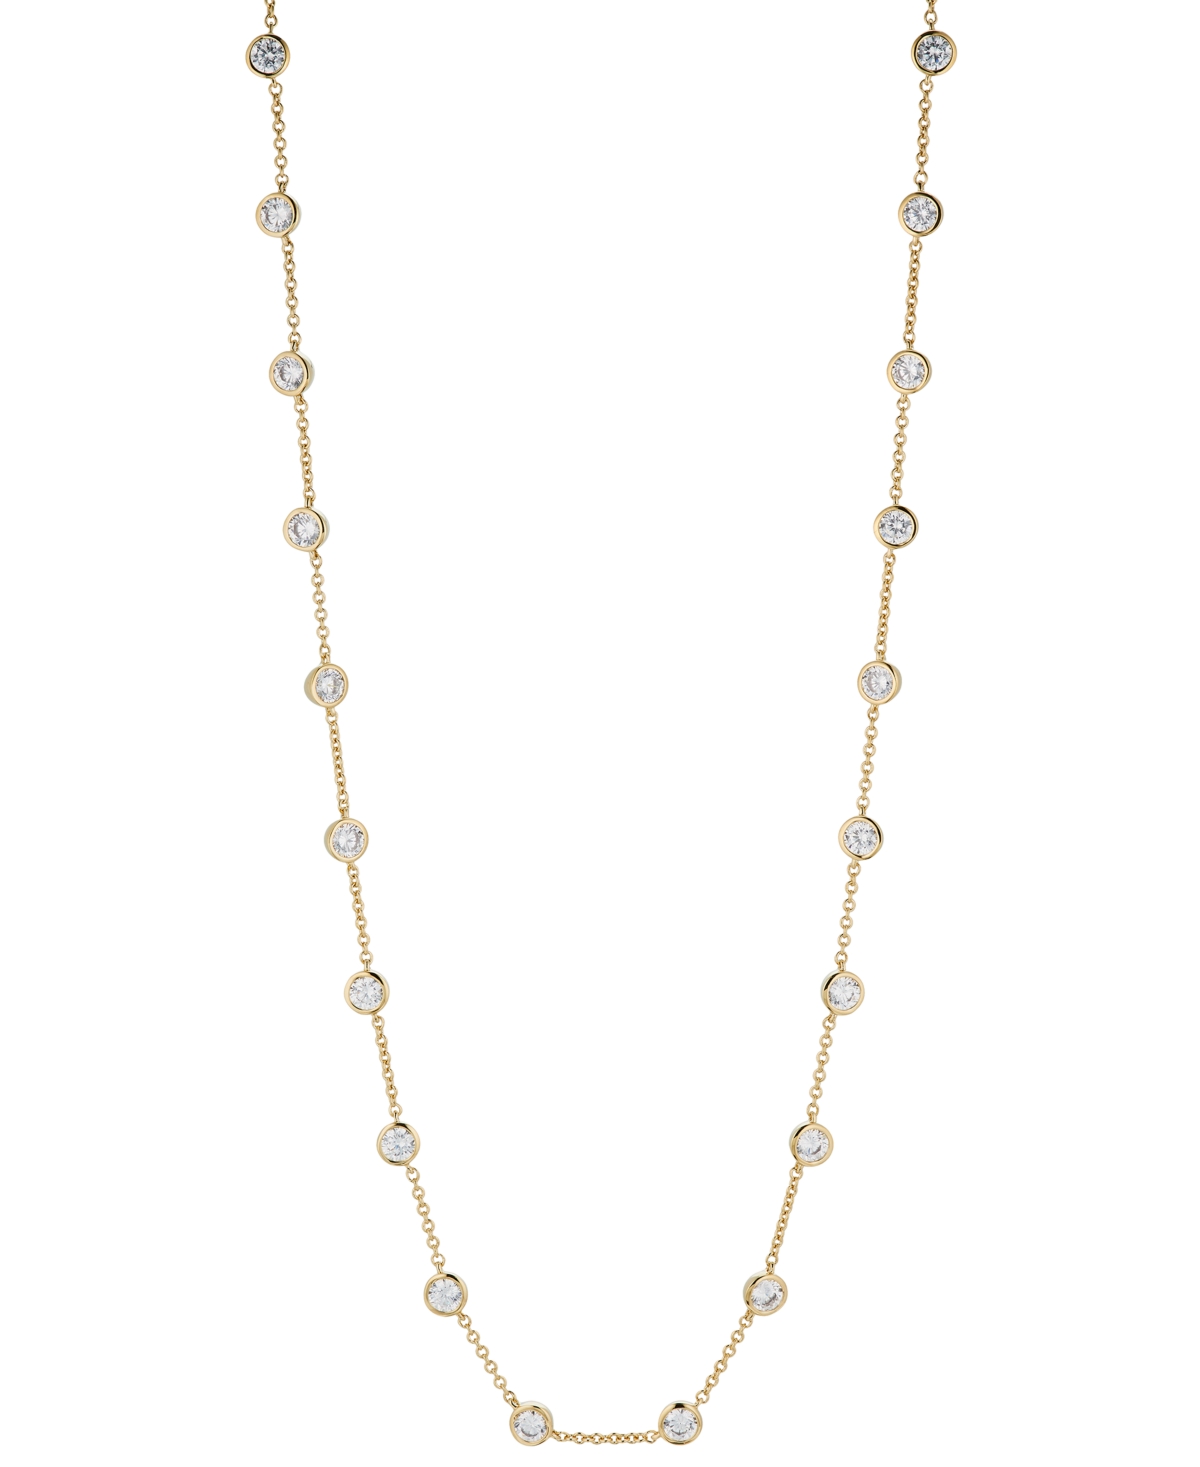 Eliot Danori 18k Gold-plated Cubic Zirconia Station Necklace, 15" + 3" Extender, Created For Macy's